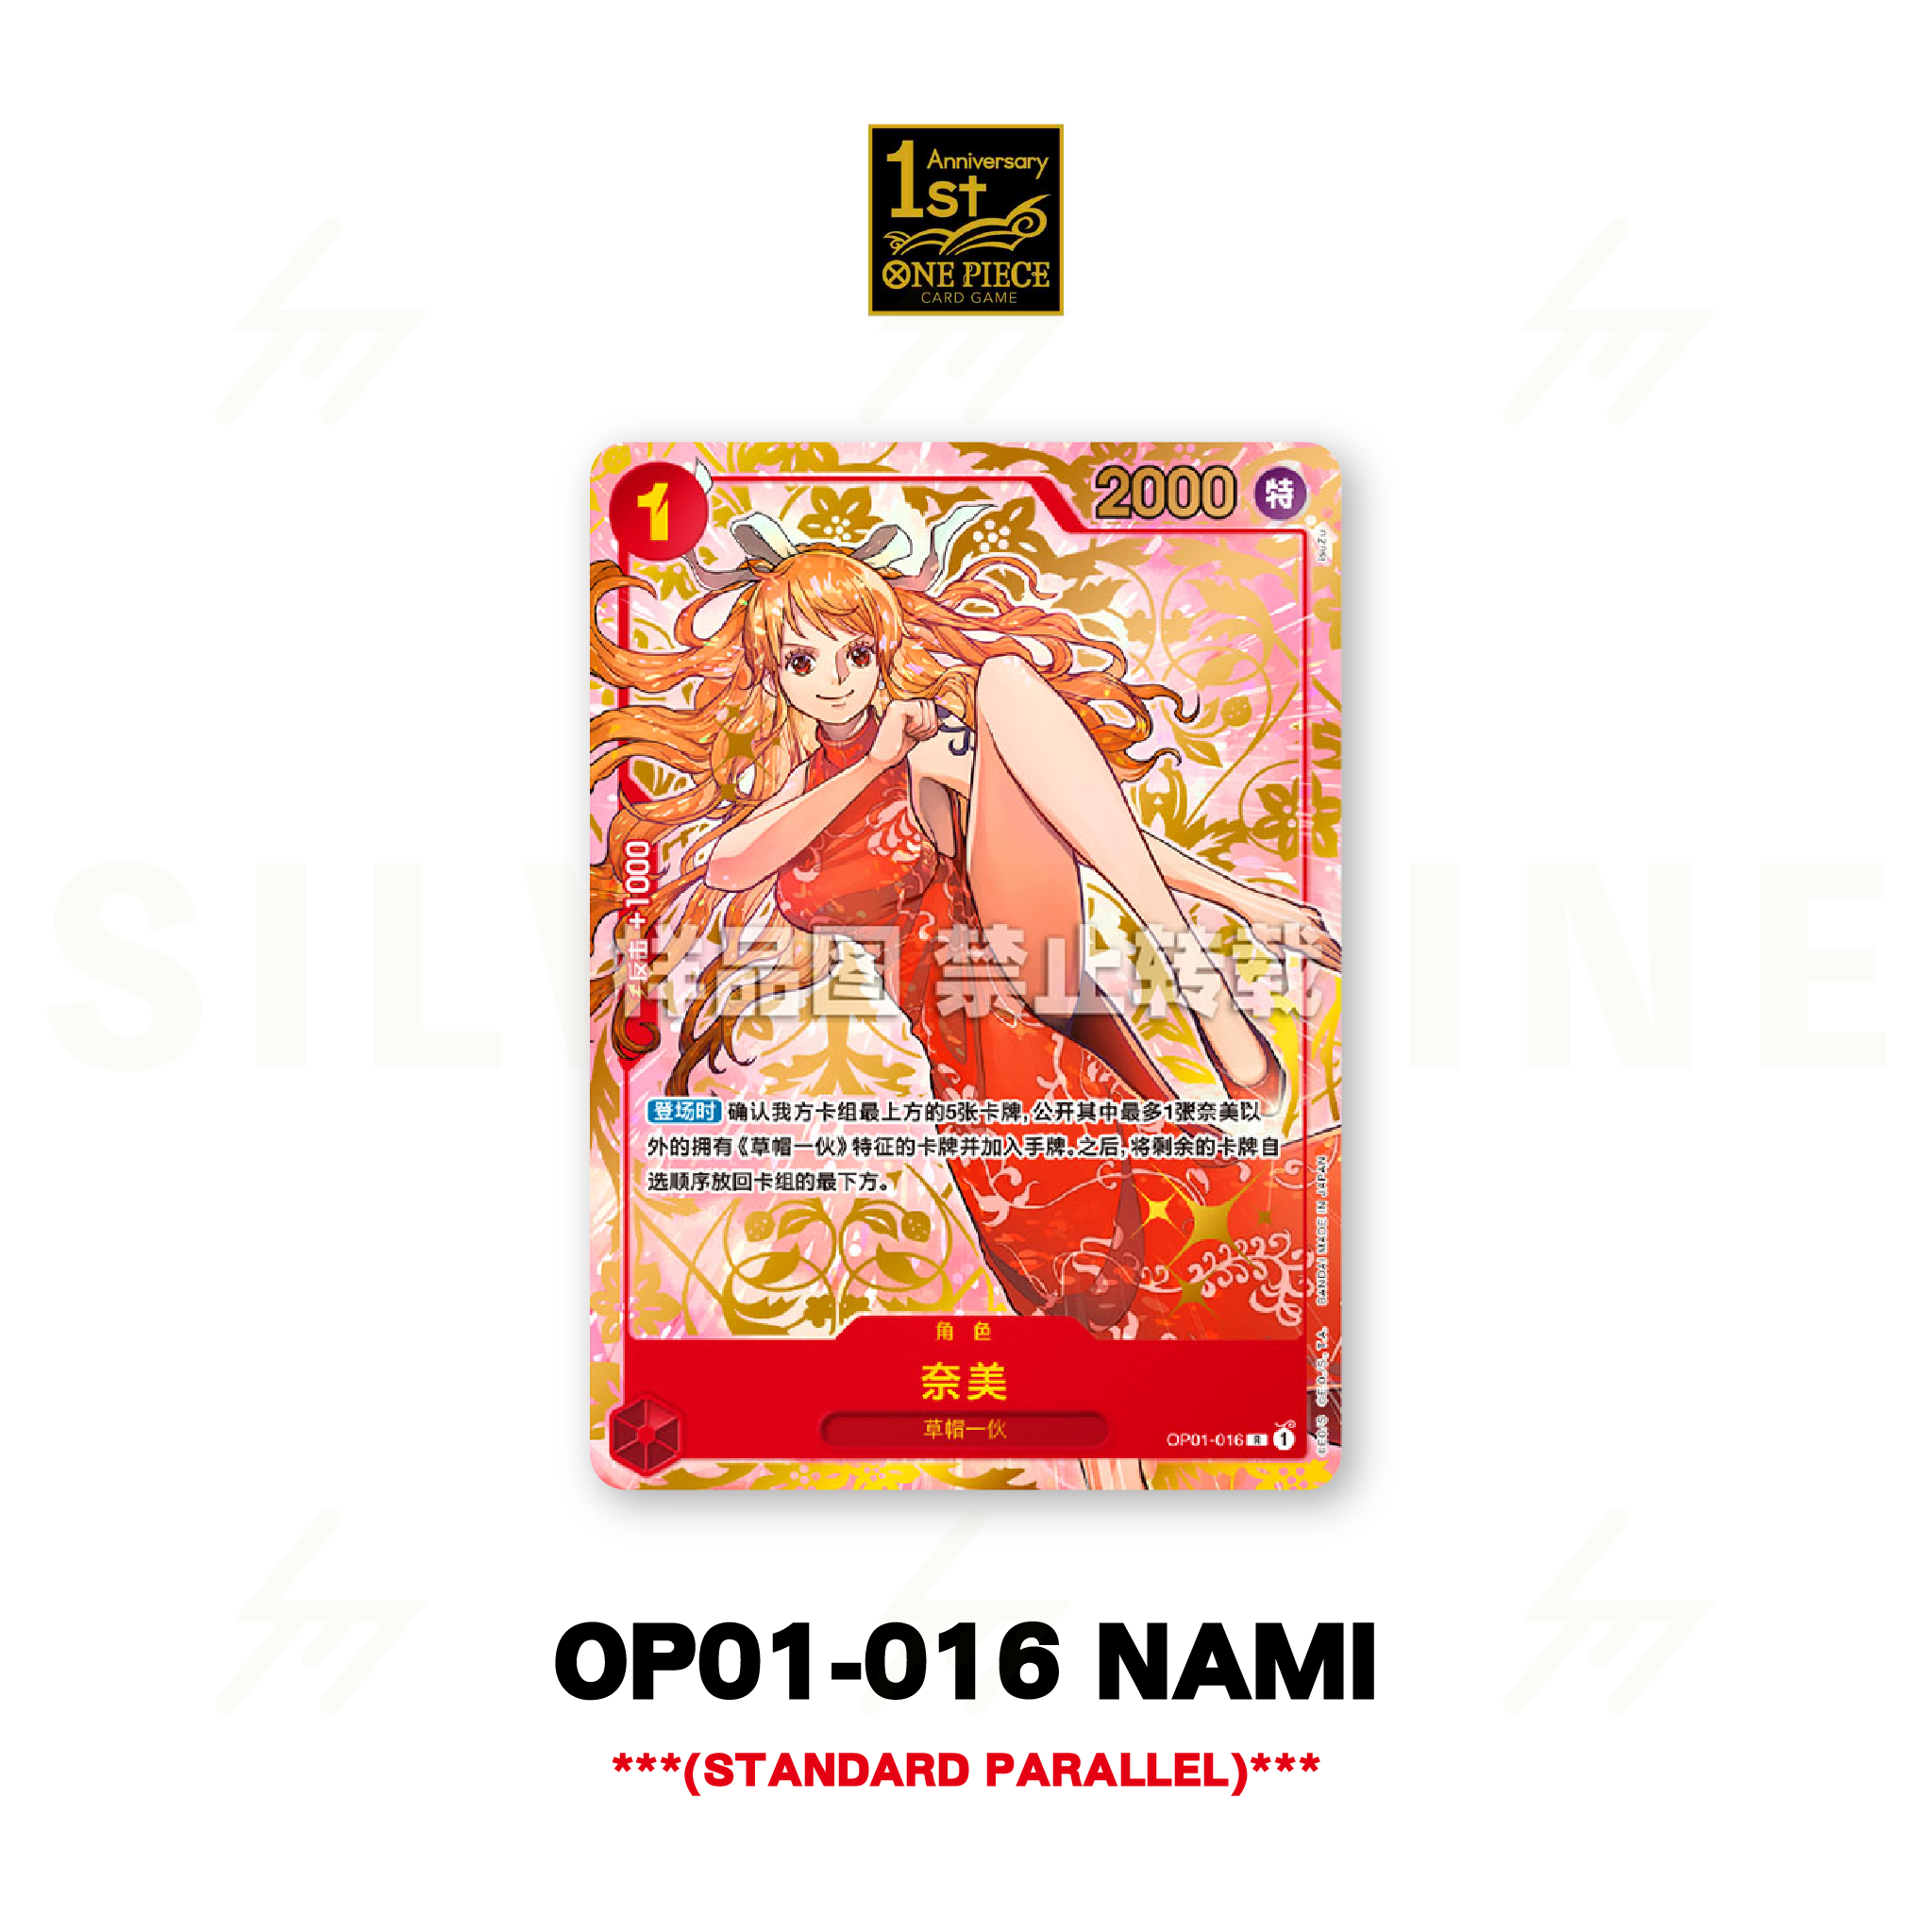 One Piece - 1st Anniversary Set (Simplified Chinese)